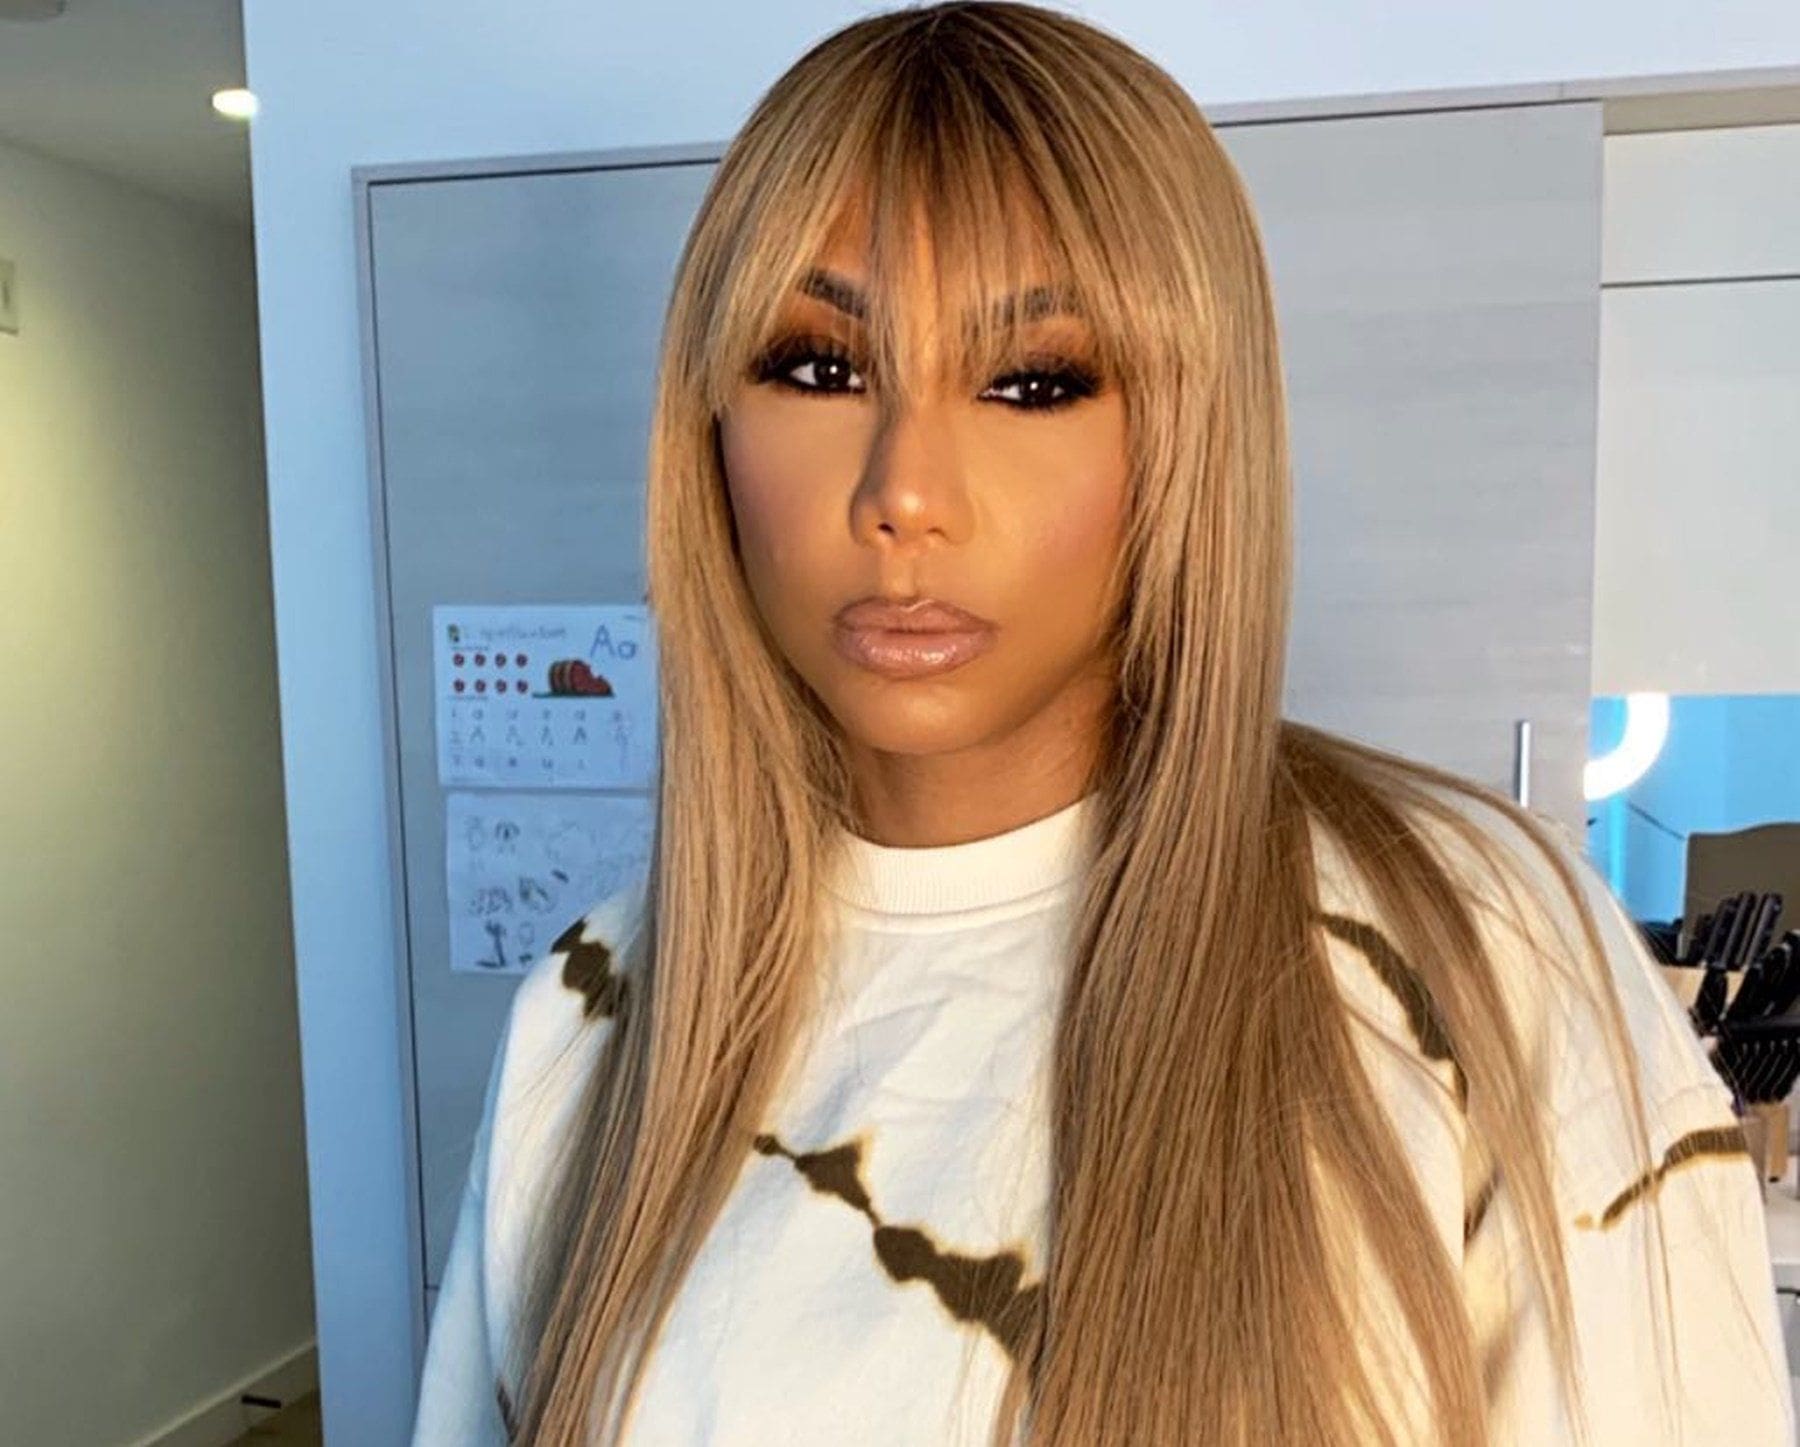 Tamar Braxton Cannot Wait For The Gym To Open: 'I Can't Find My Waist!'